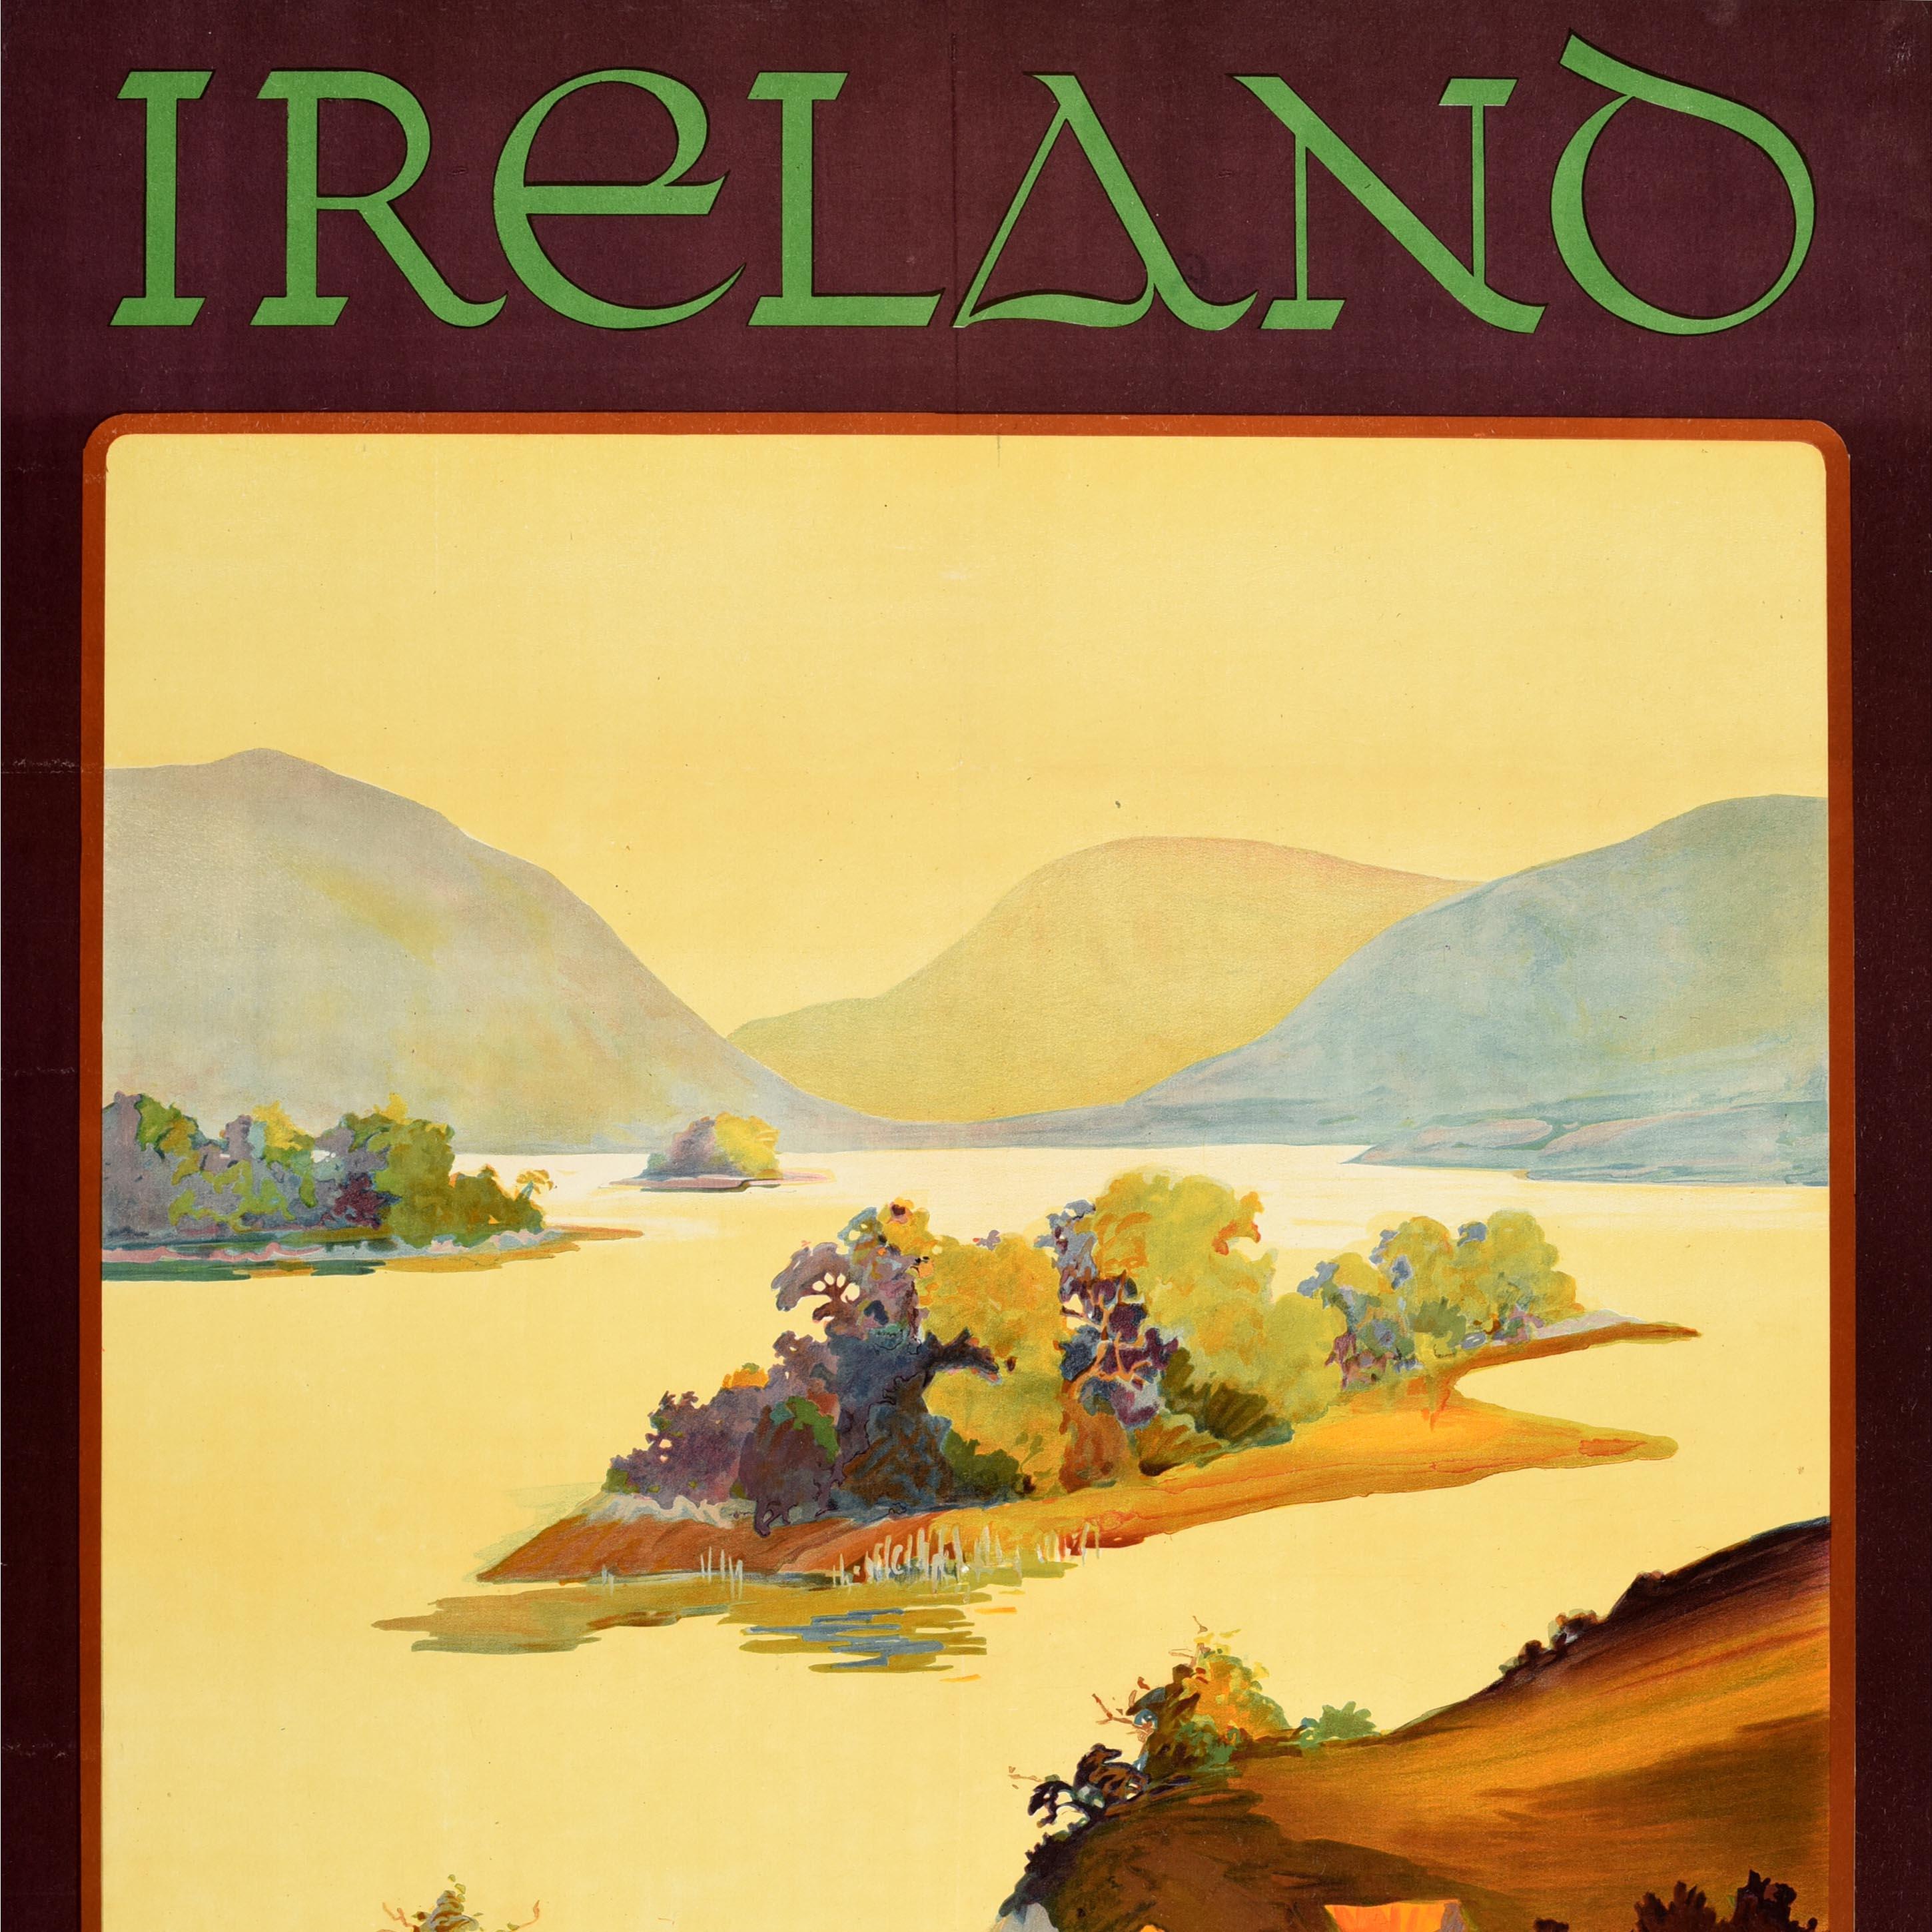 British Original Vintage Travel Poster Ireland Come Back To Erin Anchor Line Cruise Ship For Sale